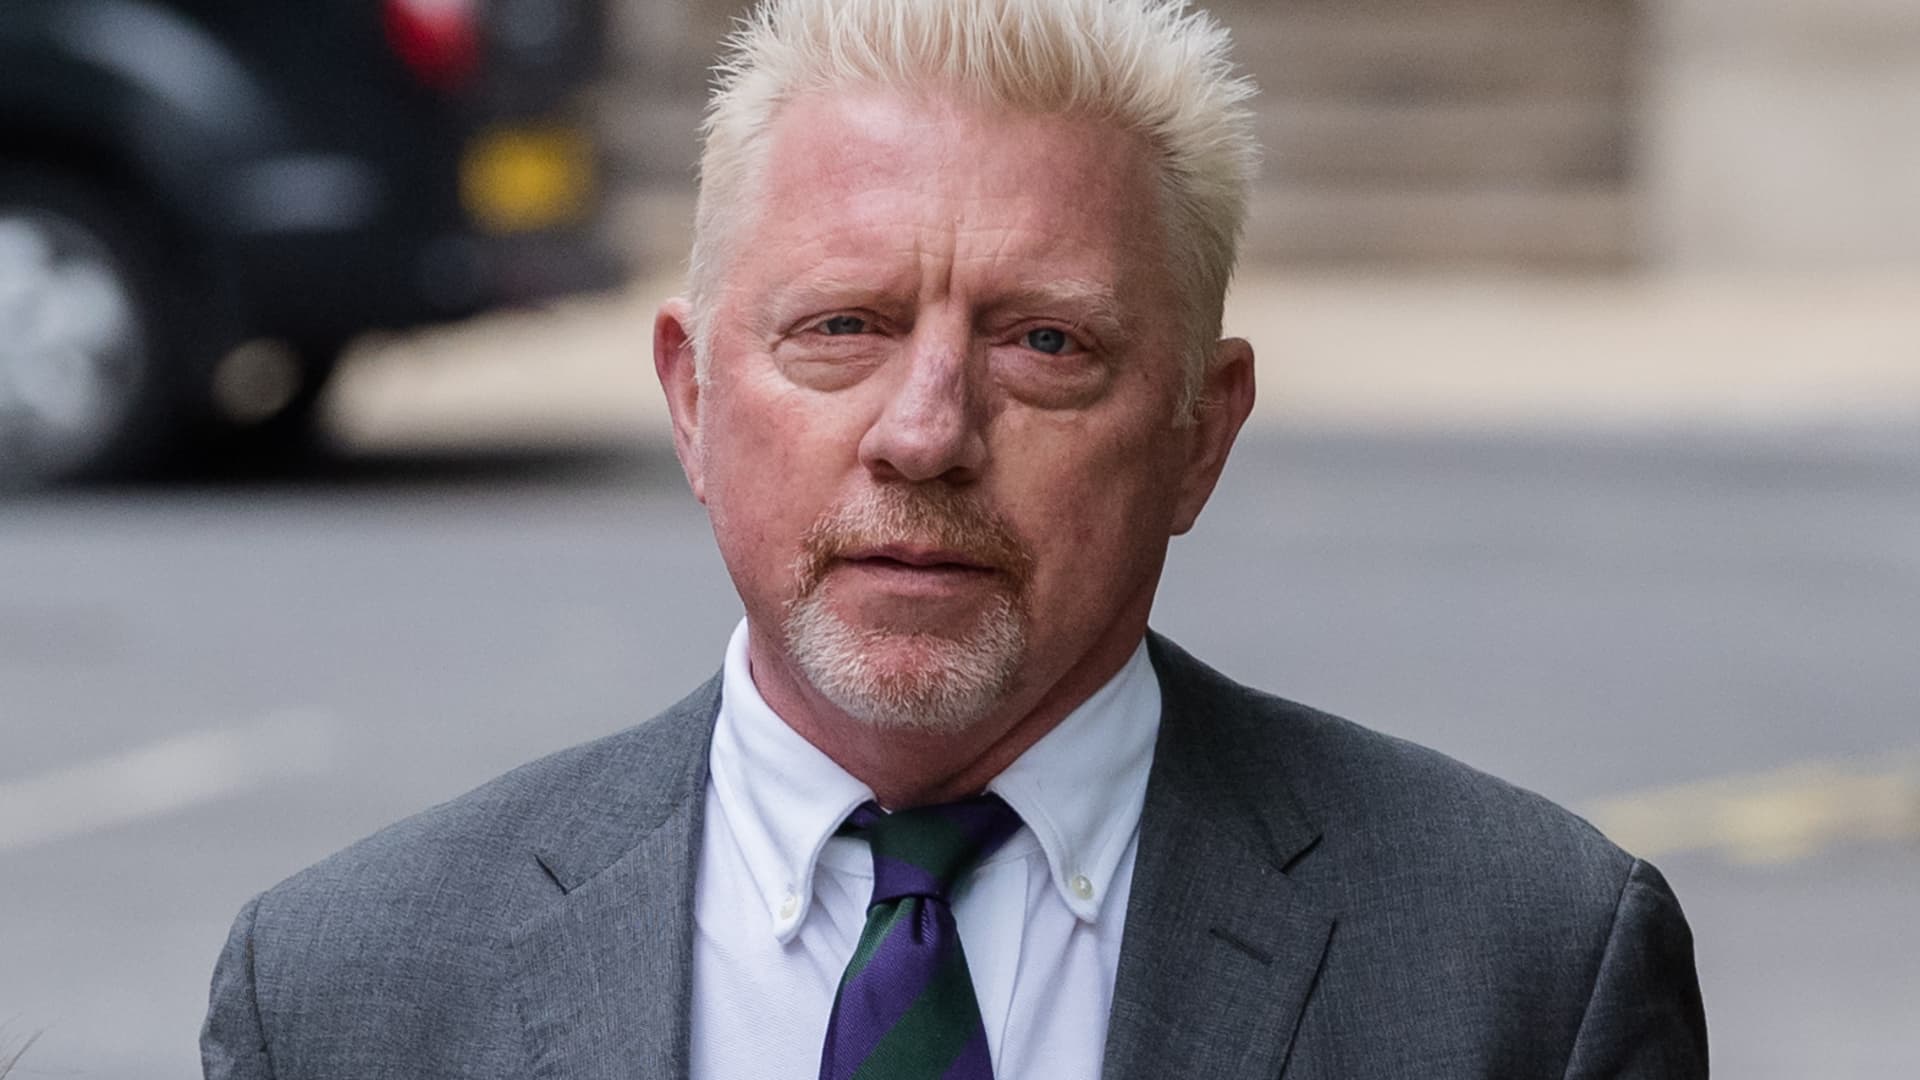 Former tennis star Boris Becker sentenced to 2 1/2 years for bankruptcy offences